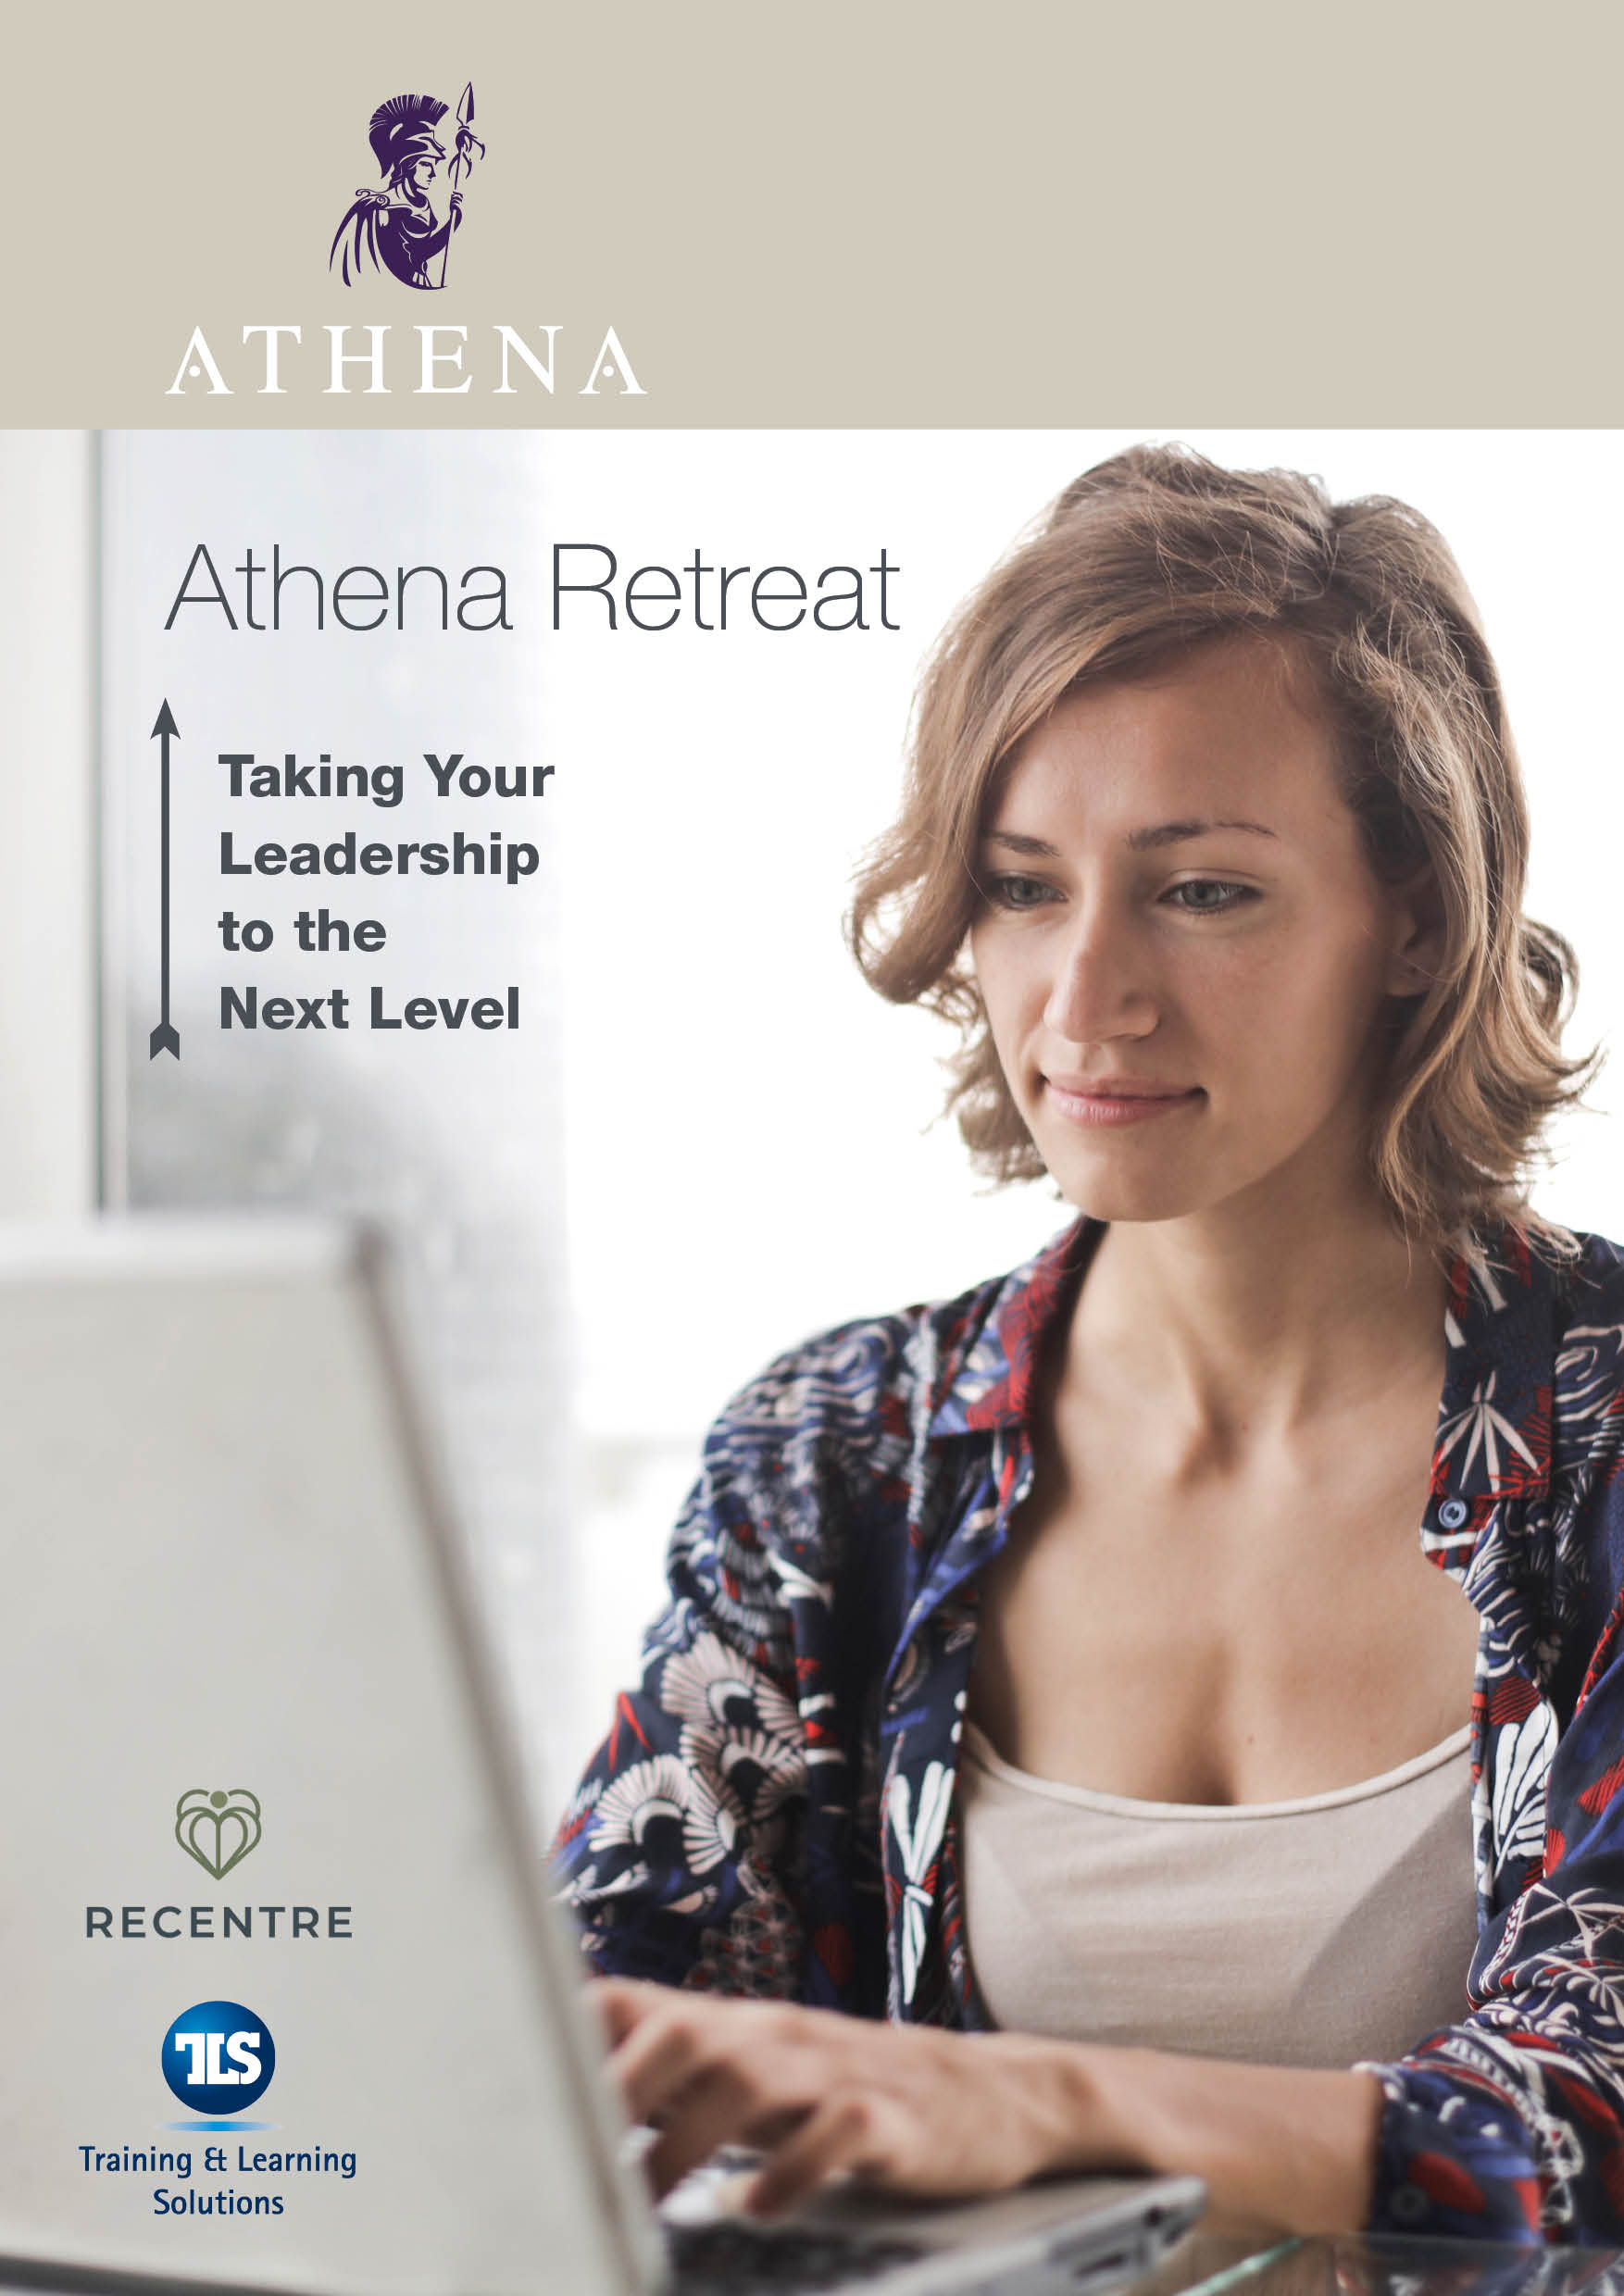 Front page of Athena Retreat brochure